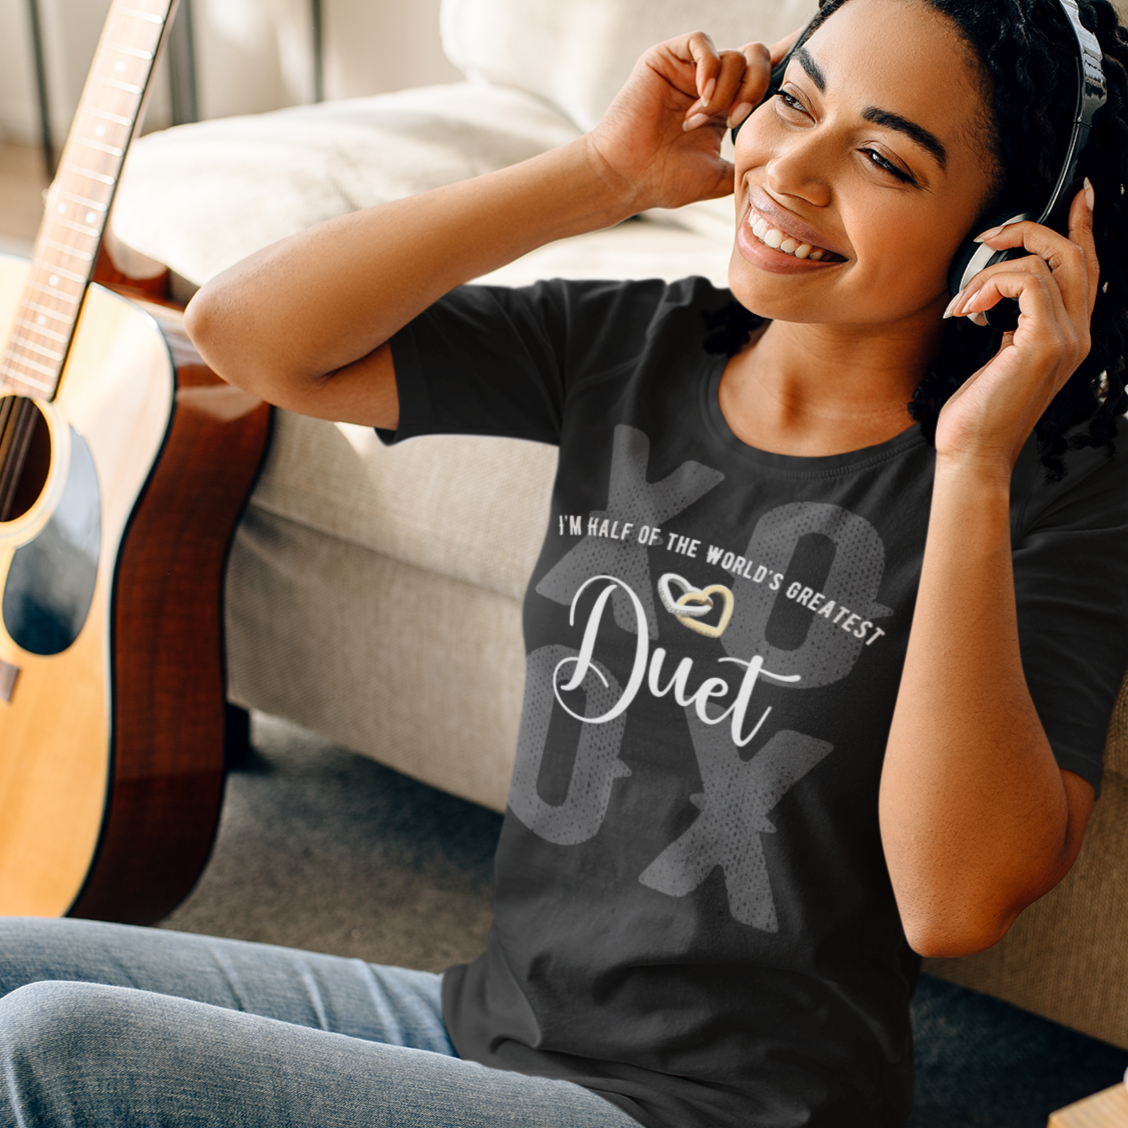 Half of the World's Greatest Duet, Interlocking Hearts Softstyle T-Shirt, Valentine's Day Gift, Romantic, Unisex, Music Fan or Musician Gift